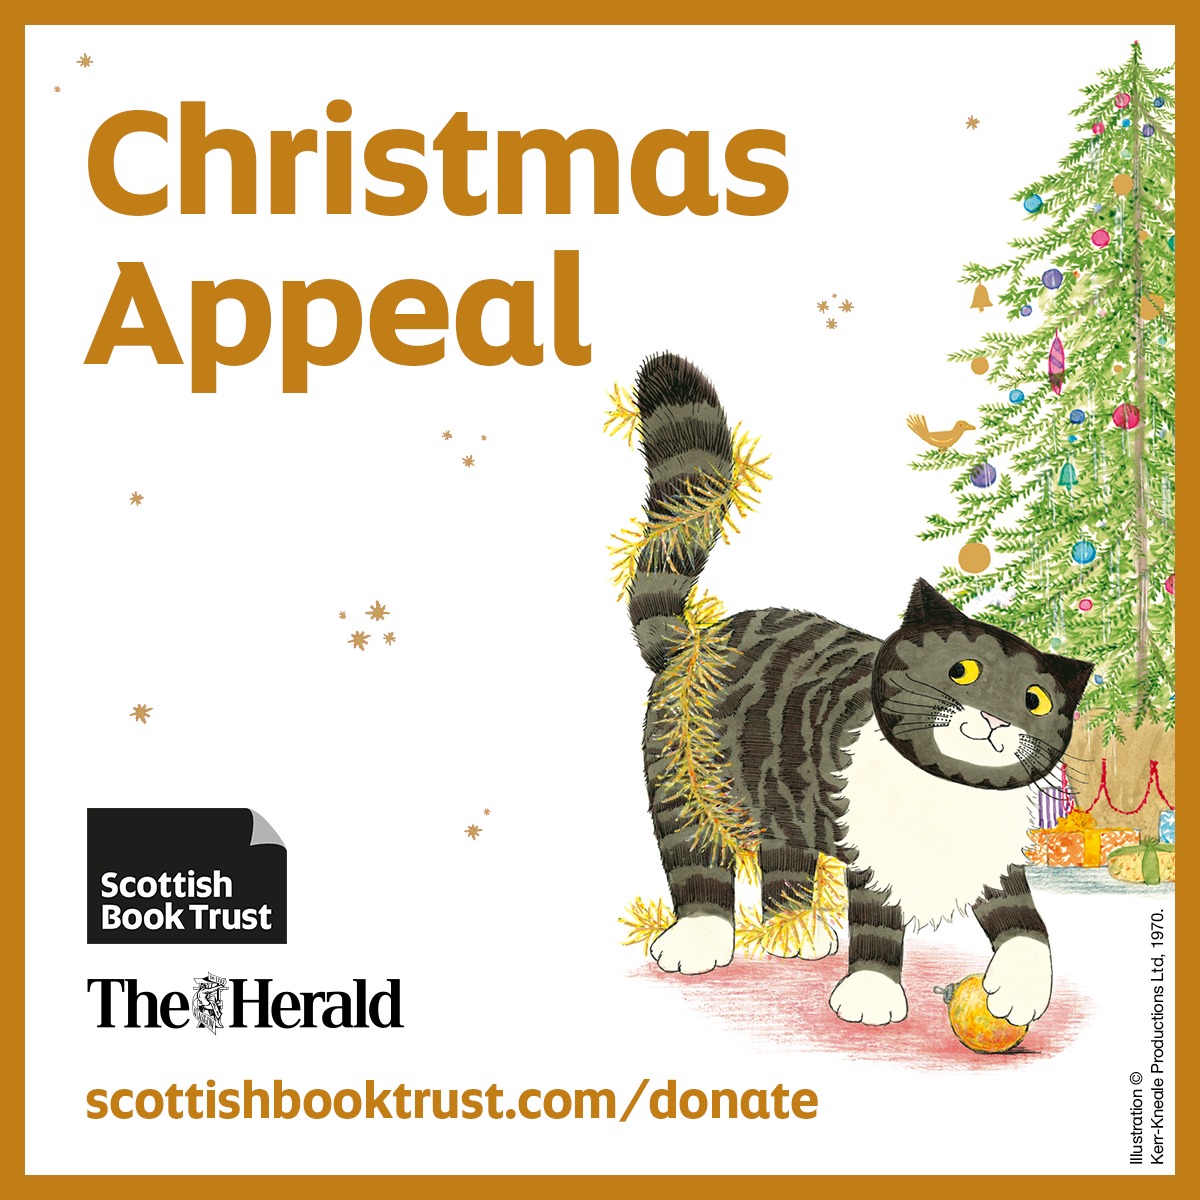 Our Christmas appeal is in conjunction with Scottish Book Trust